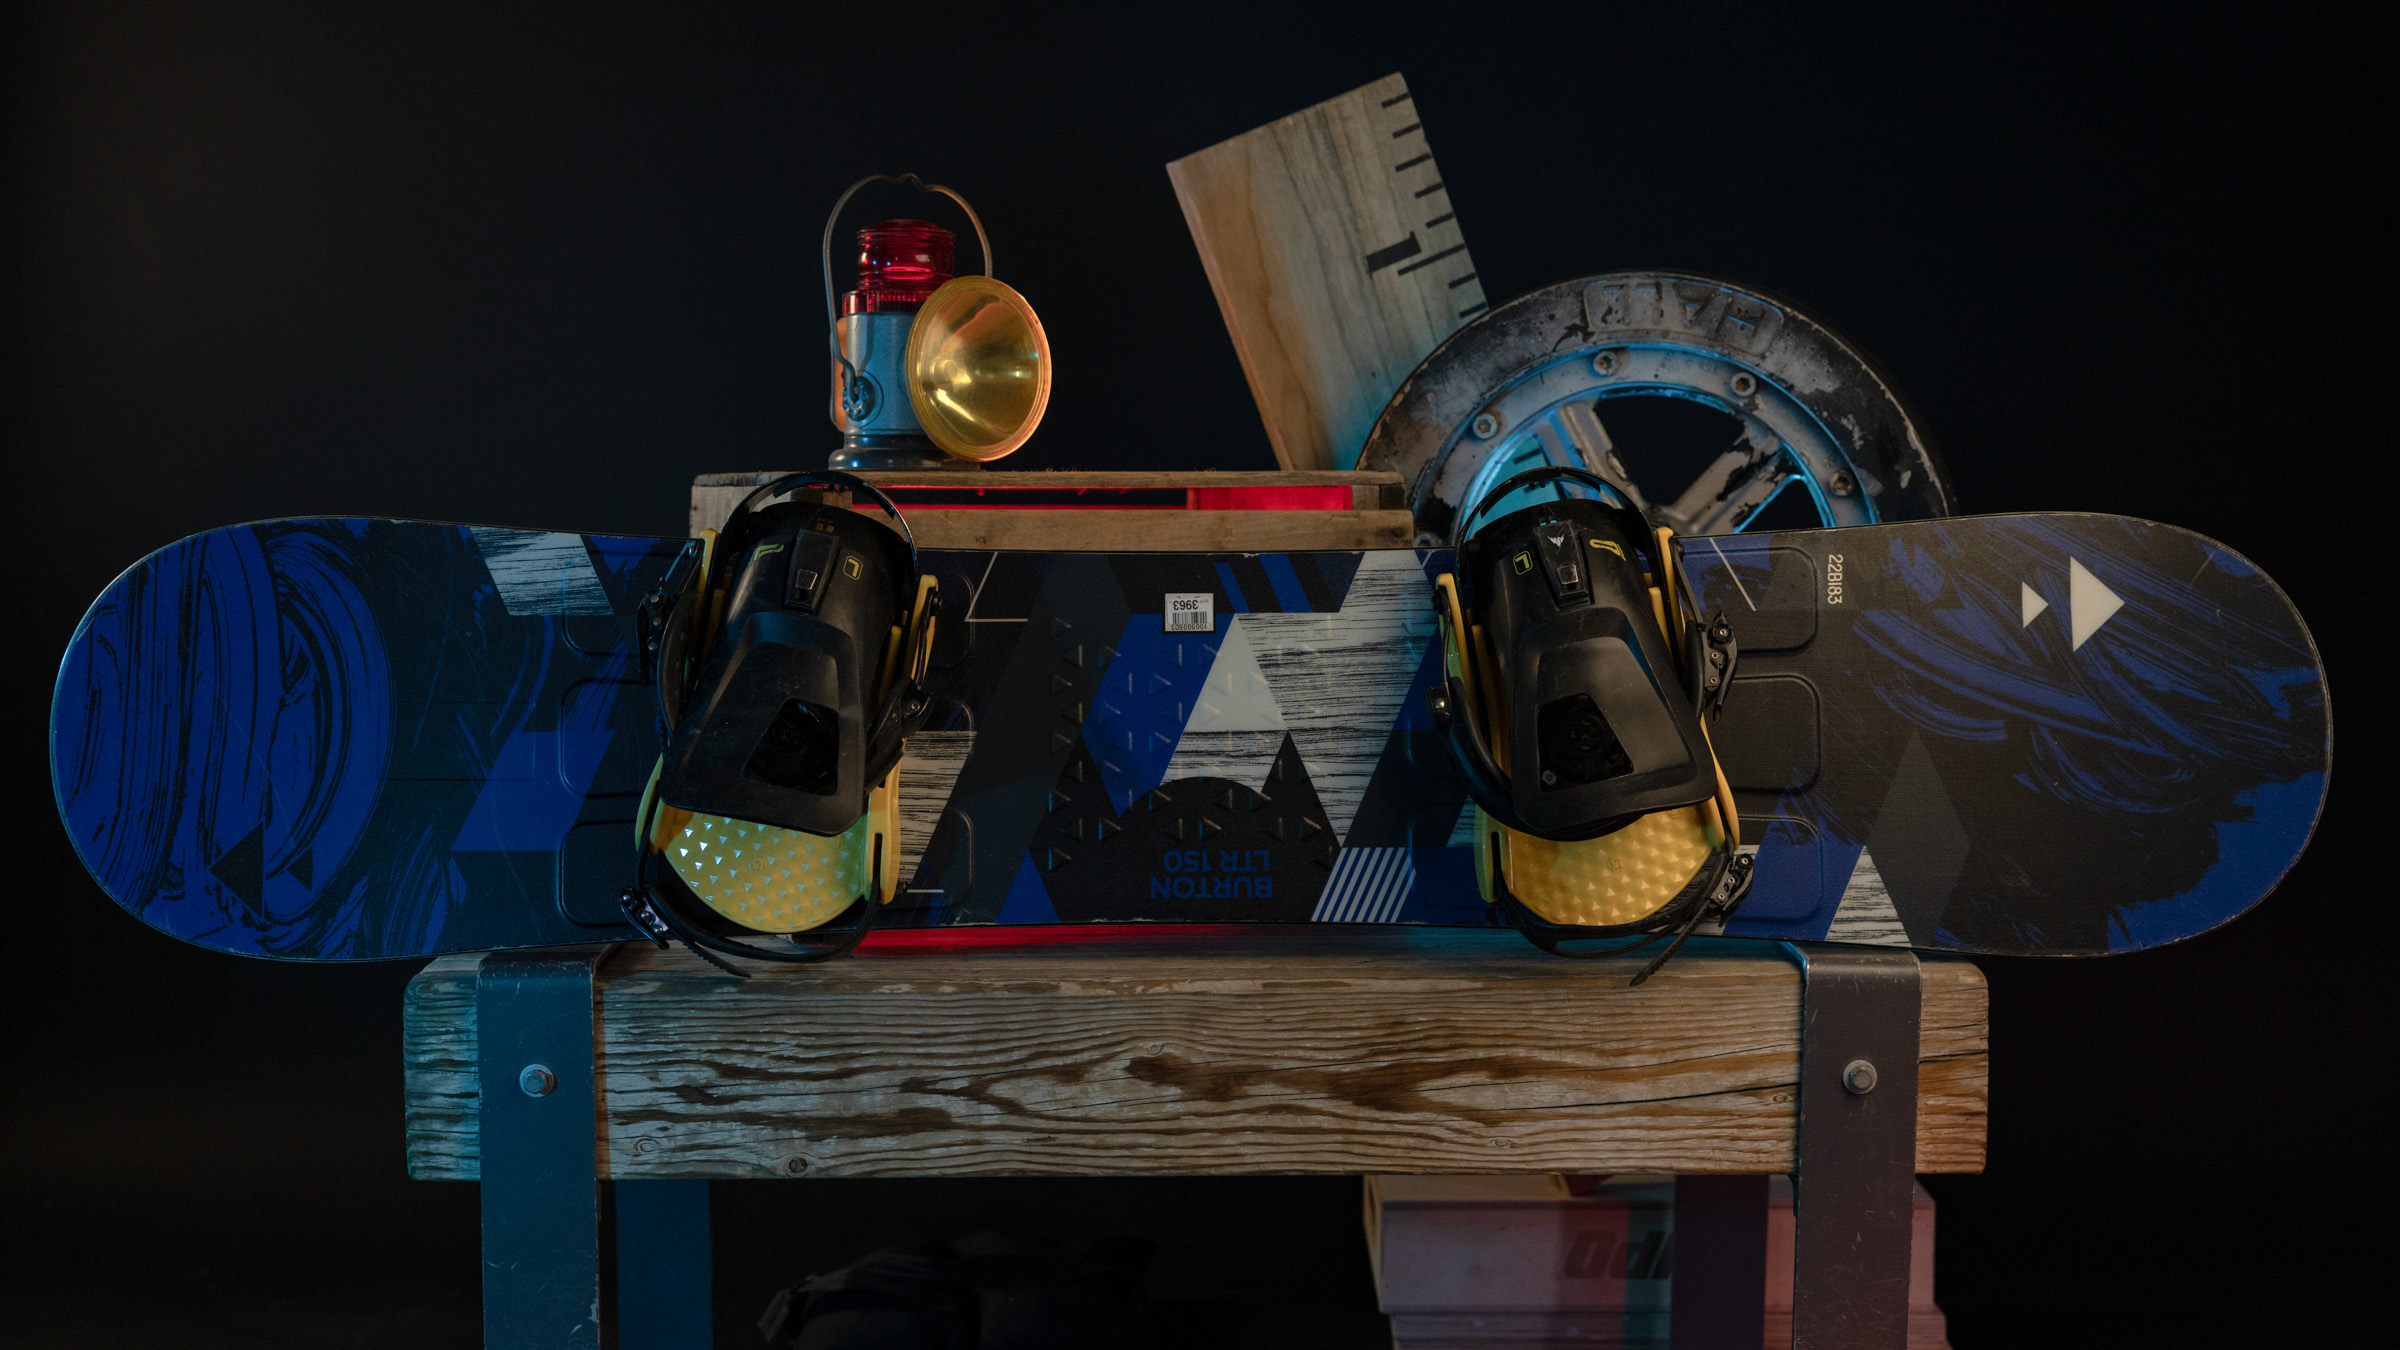 Snowboard and bindings displayed on a wooden box